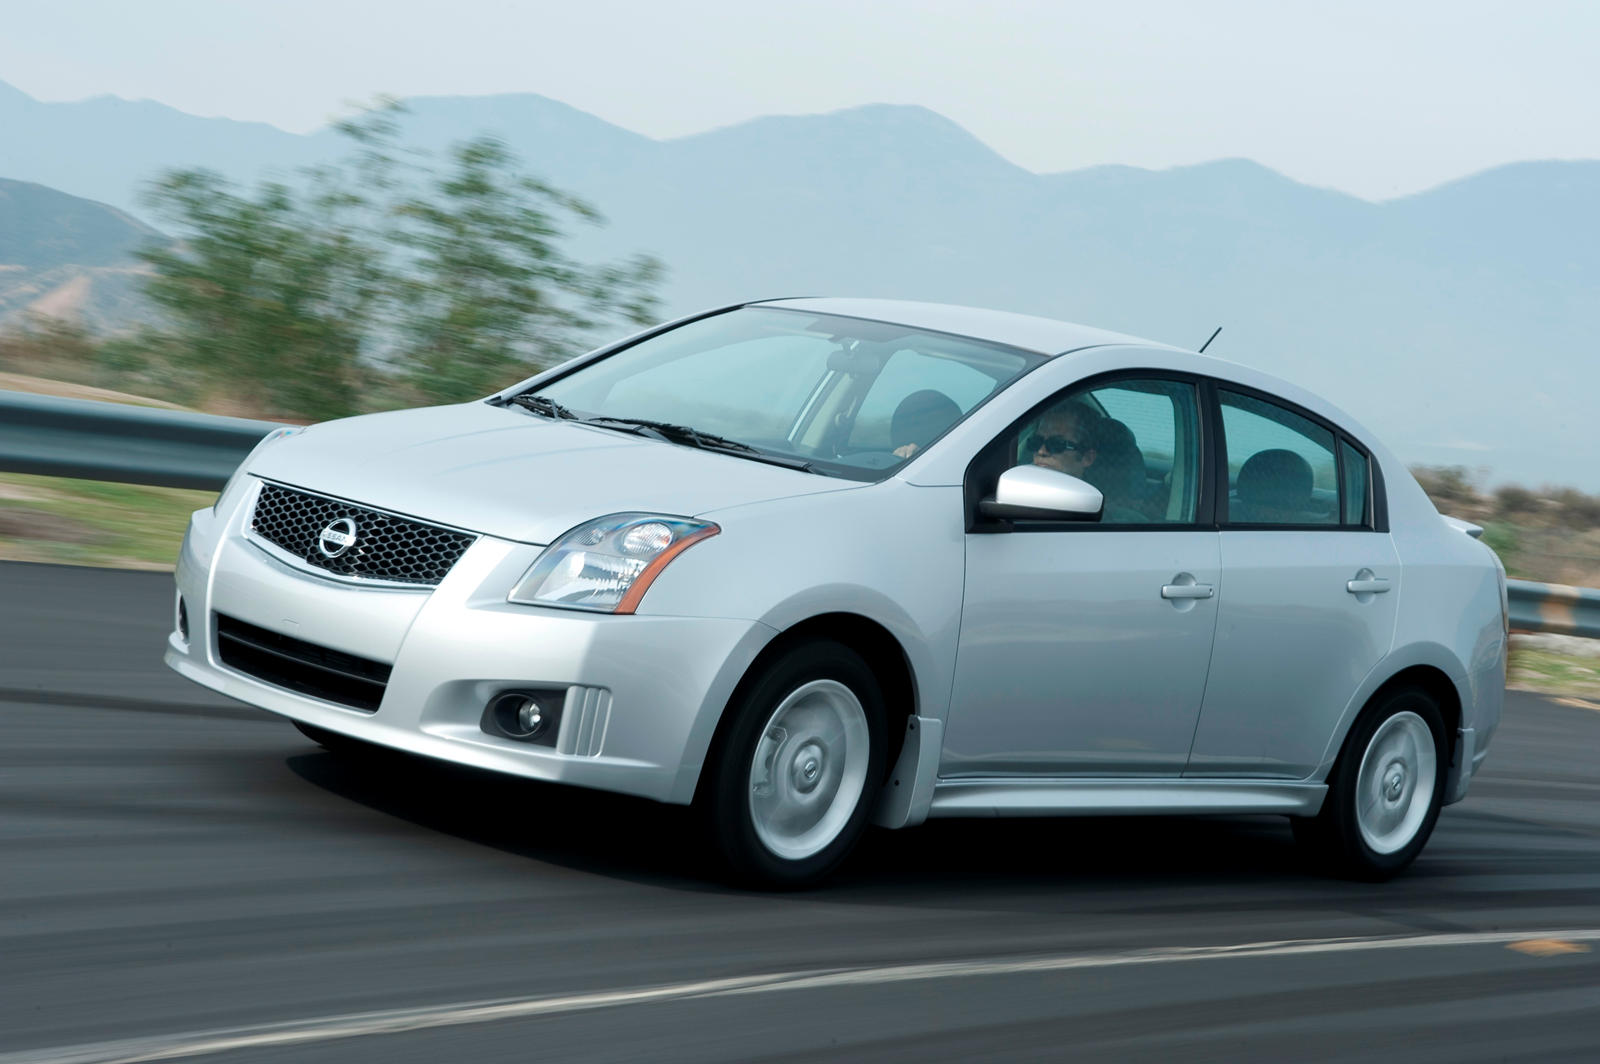 2008 Nissan Sentra Front View Driving